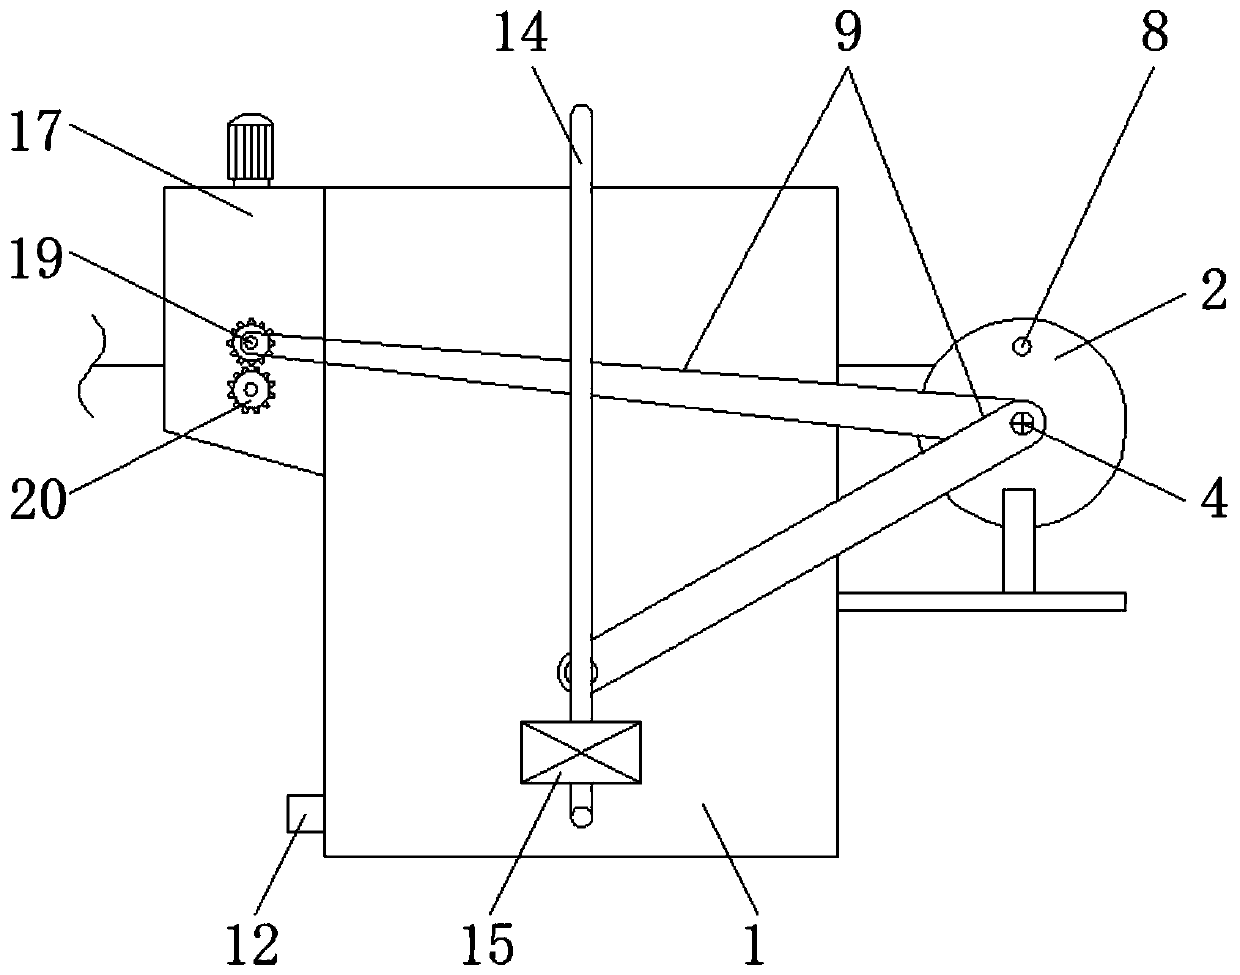 Uniform coloring device for yarn spinning convenient for collecting waste liquid